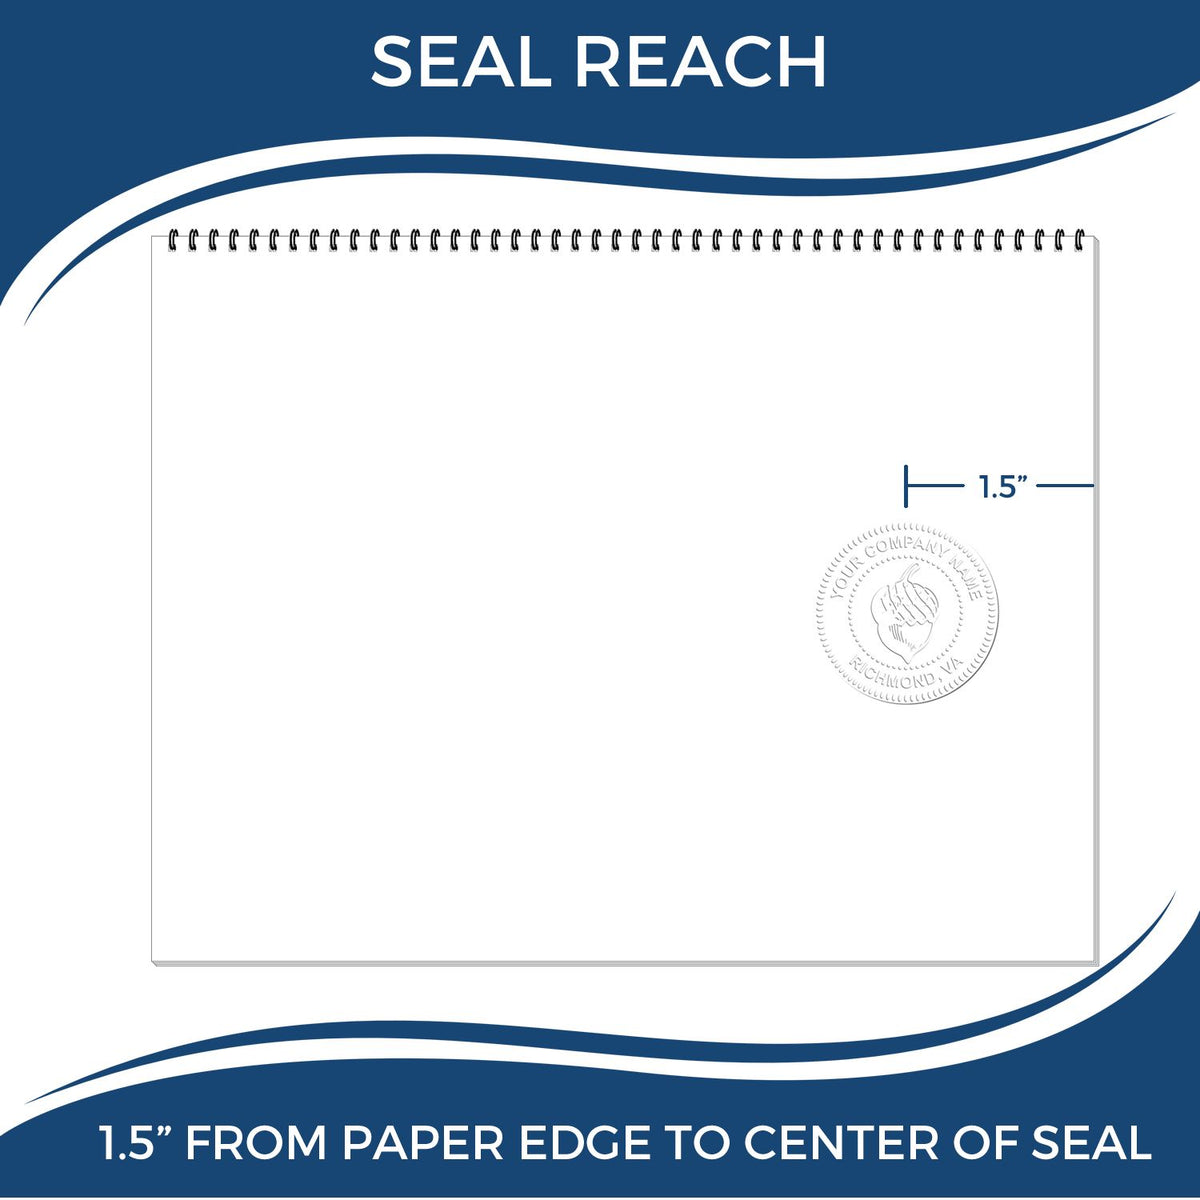 An infographic showing the seal reach which is represented by a ruler and a miniature seal image of the Handheld California Professional Engineer Embosser